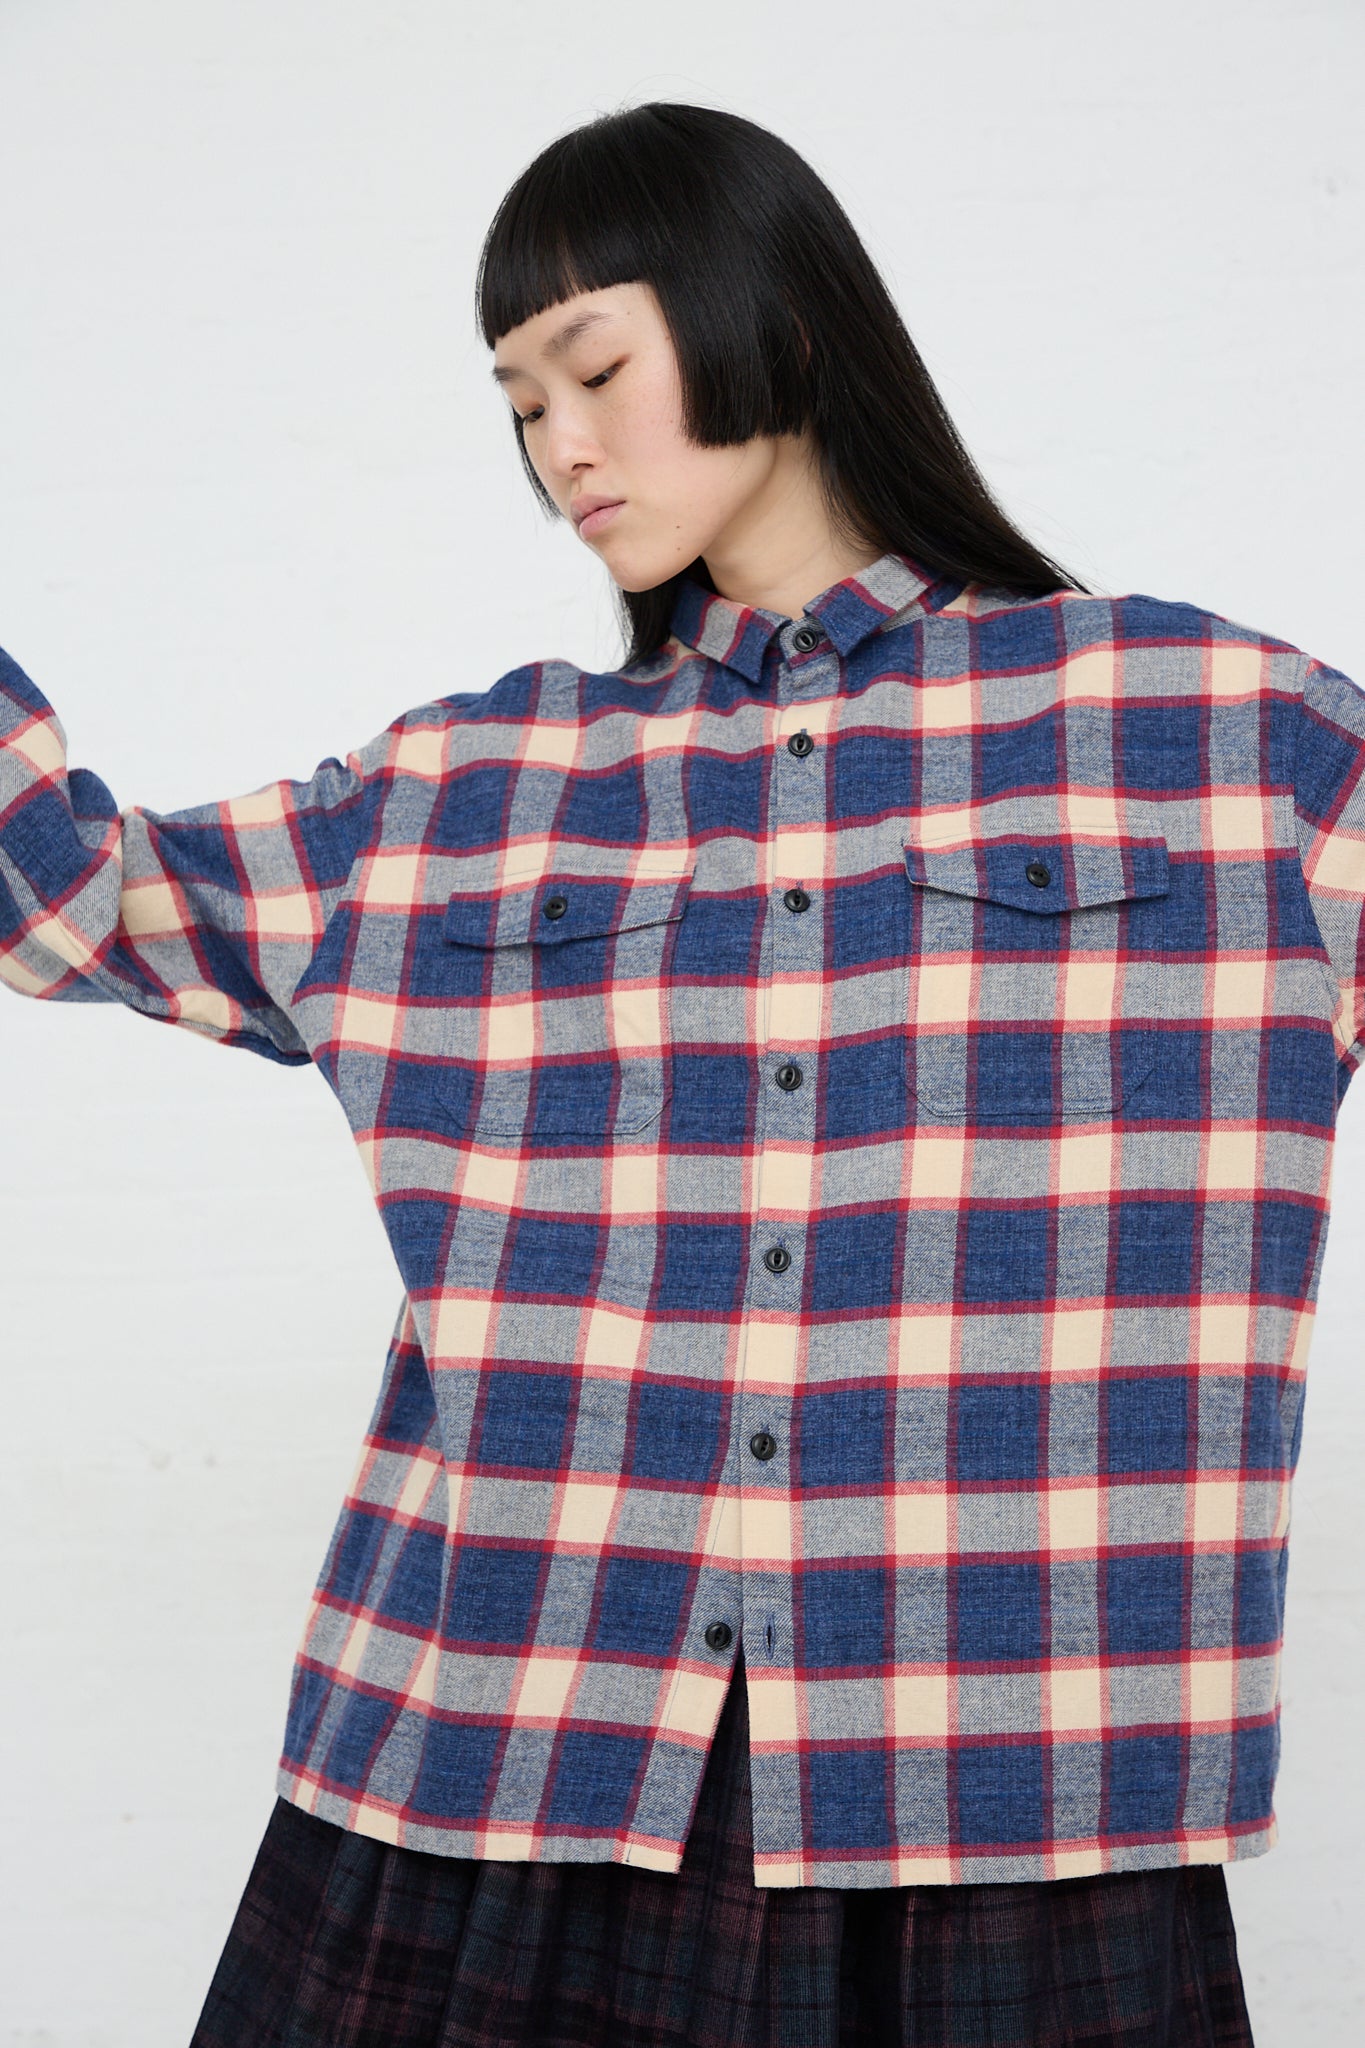 A woman wearing an Ichi plaid, Woven Cotton Shirt in Ivory and Navy.